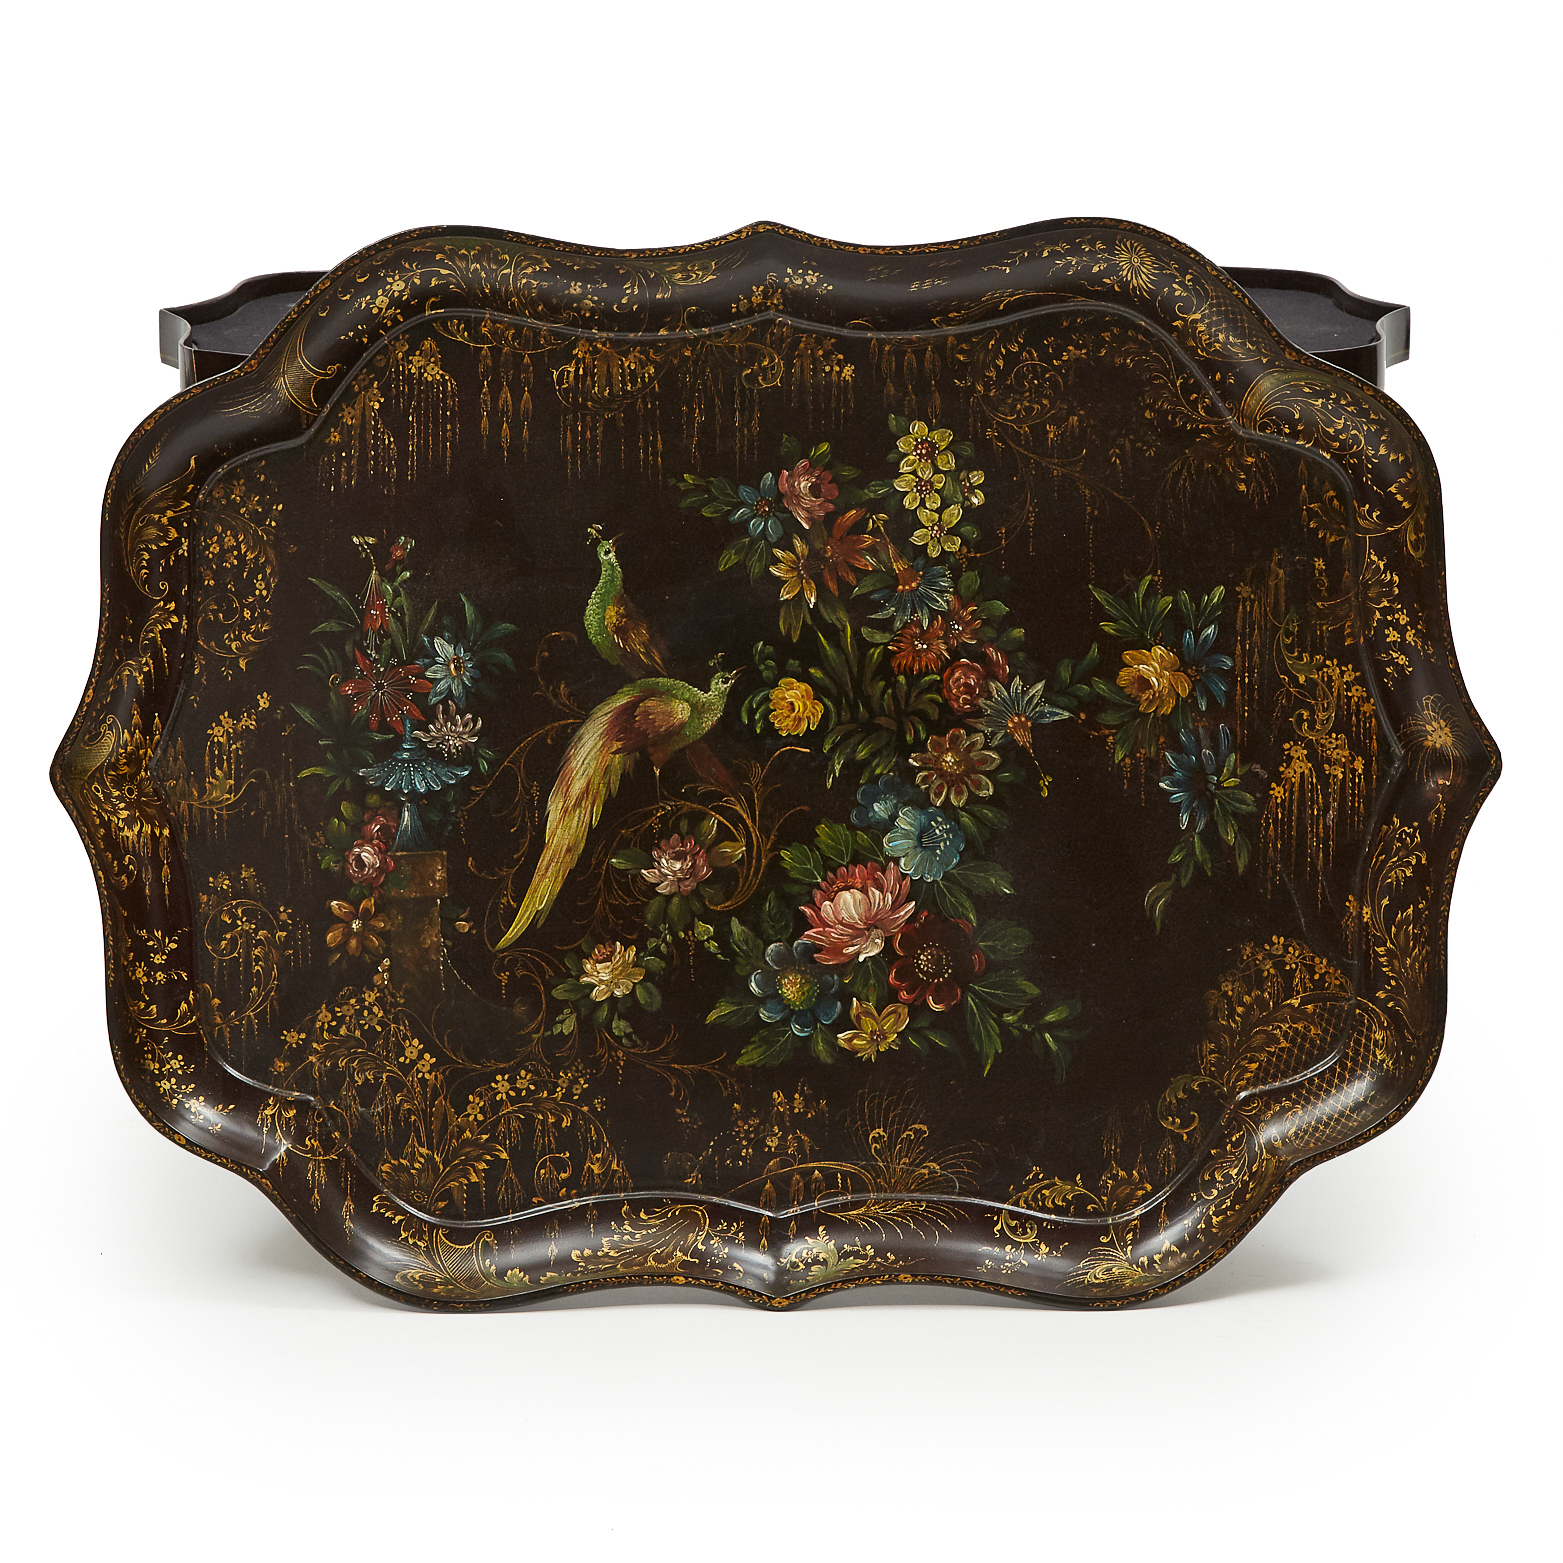 English Victorian Papier Maché Tea Tray on Stand, c.1840 and later